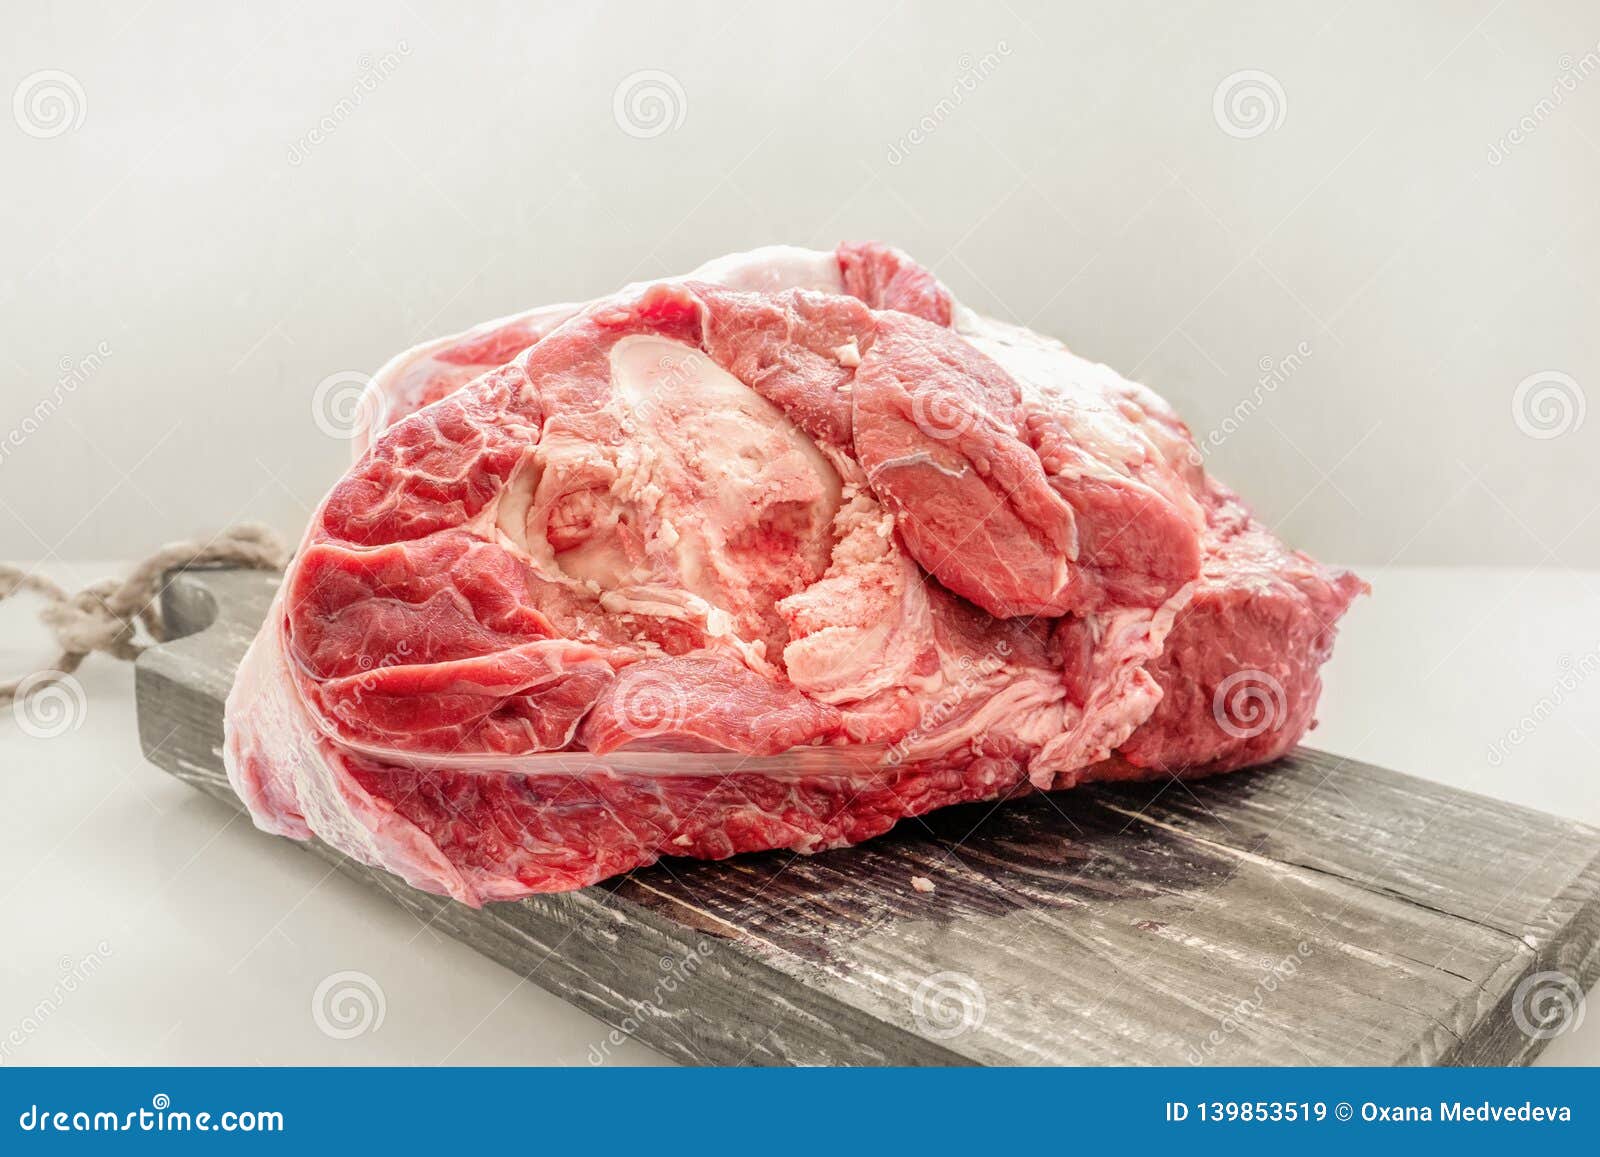 the freshest beef knuckle with bone lies on a wooden thick board on a light background. close-up. copy space